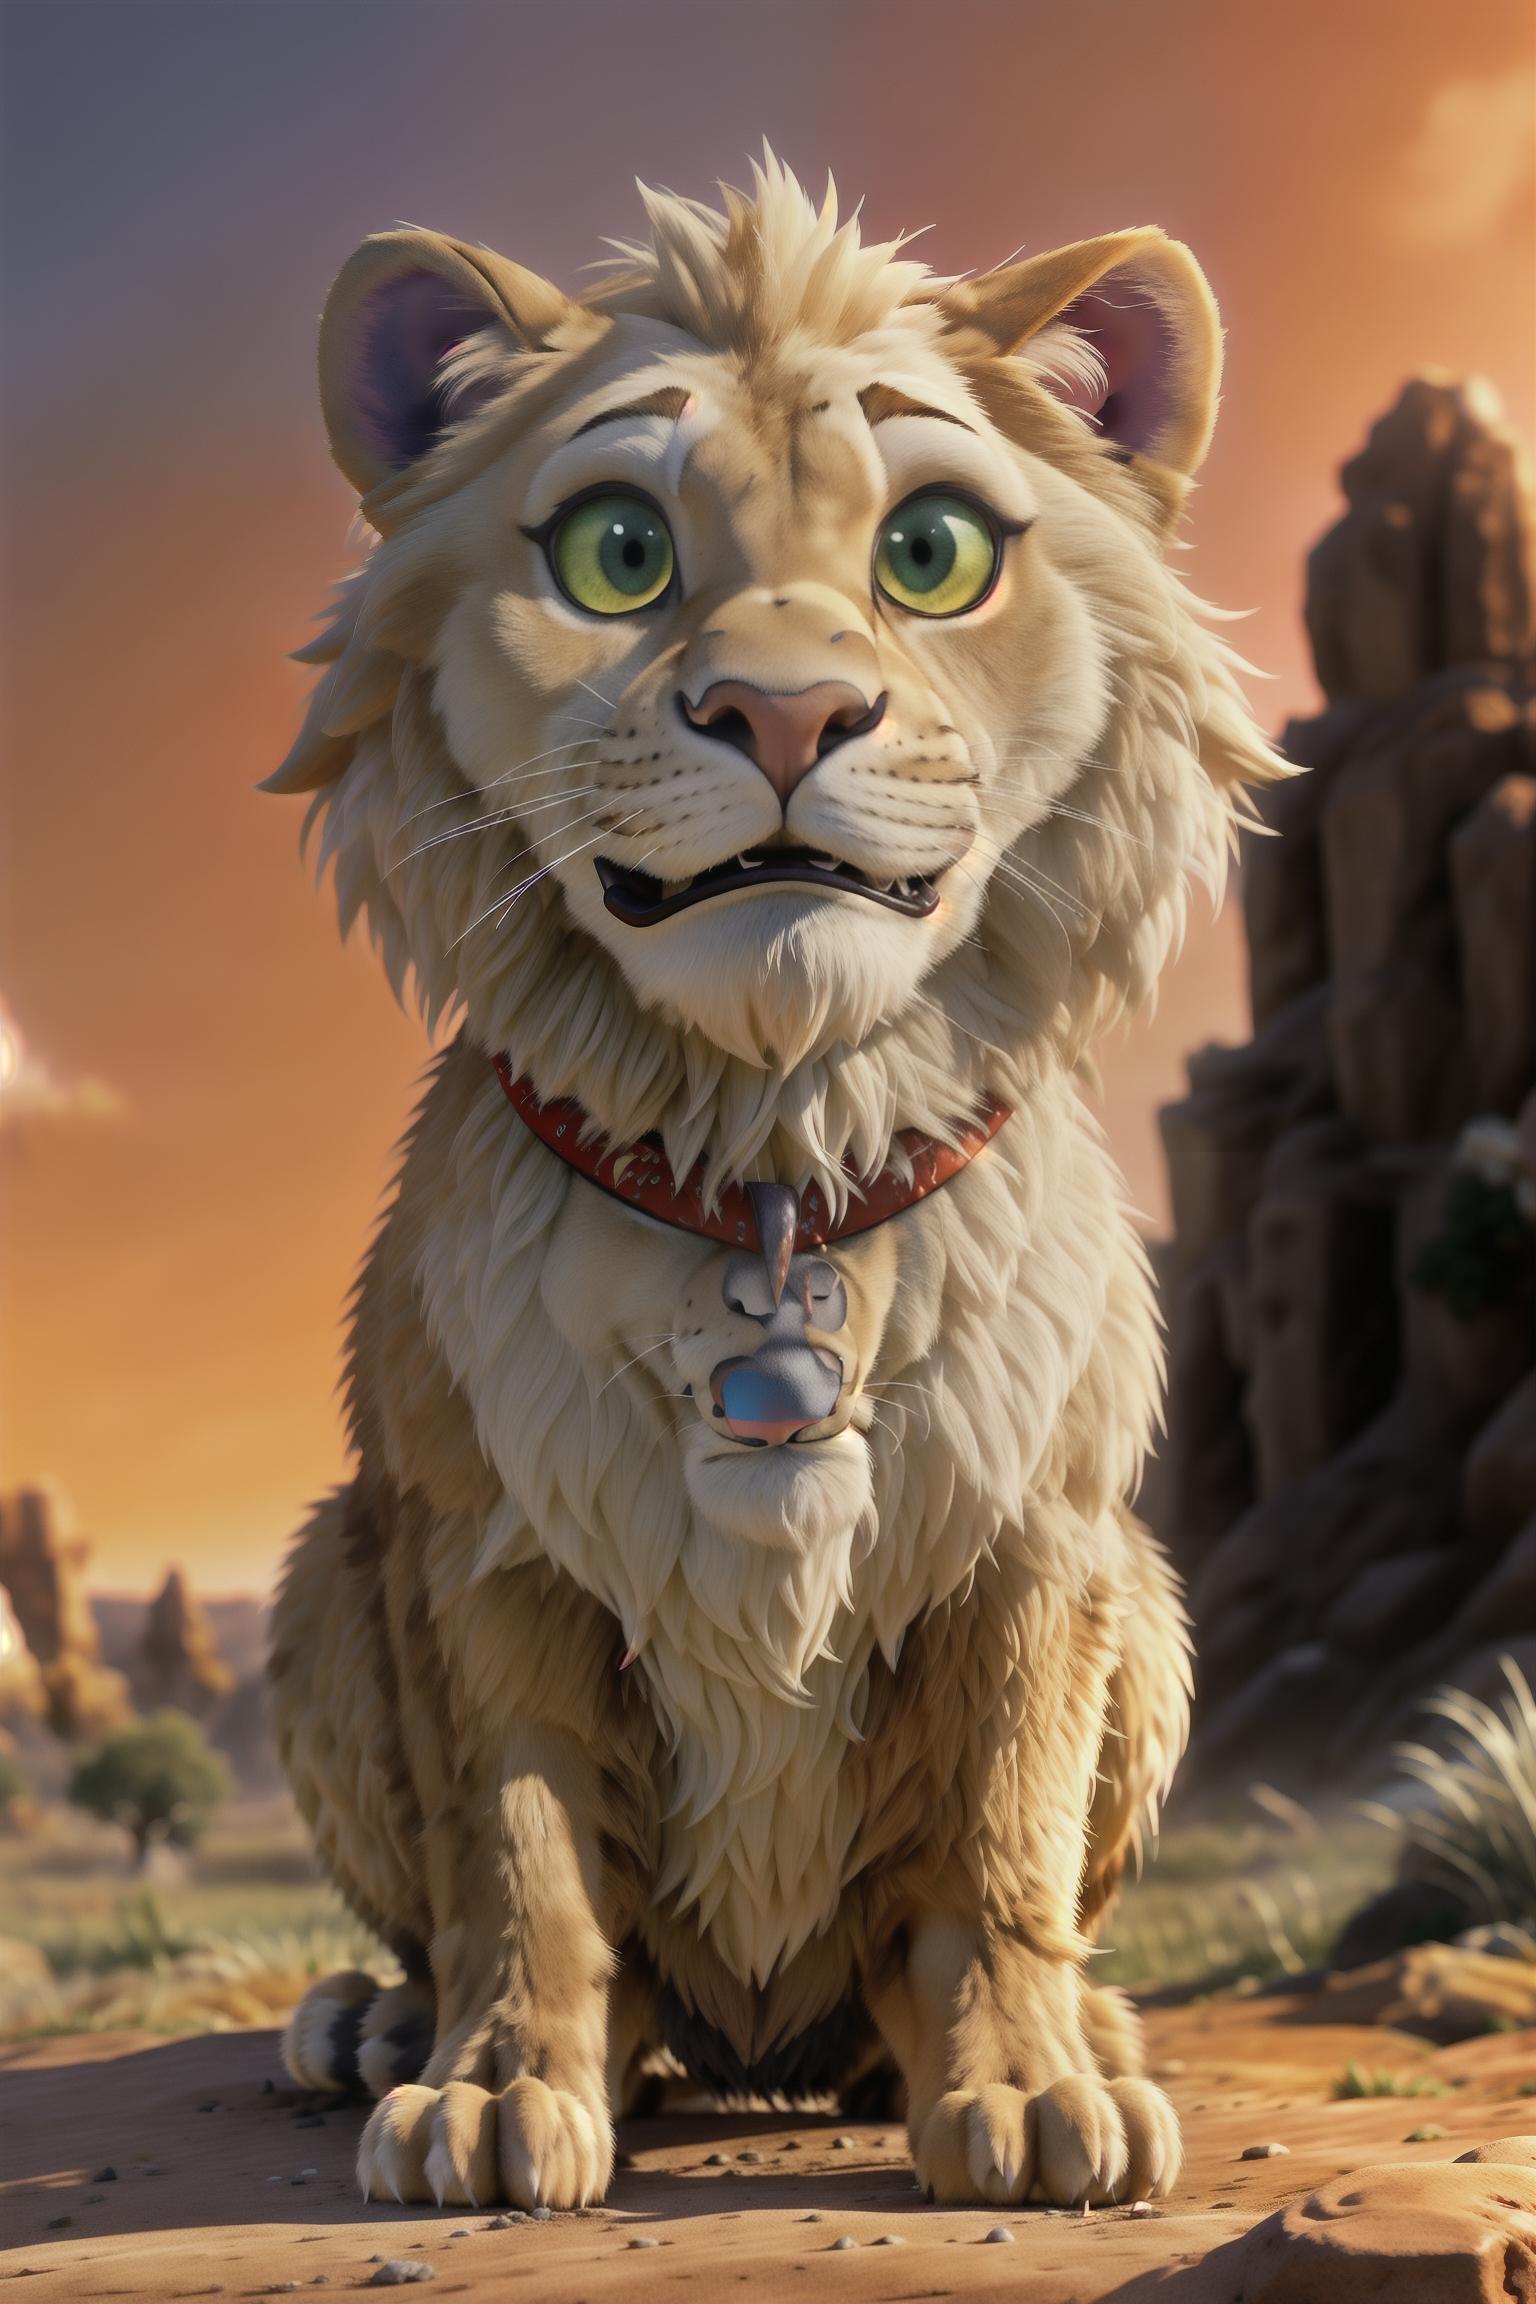  majestic lion, (leader:1.5), (strong physique), (sharp claws and fangs), (displaying power and majesty), (courageous gaze:1.0), (determined eyes), (protector of the pride), (golden fur), (streamlined figure), (typical lion characteristics), (african savannah:1.0), (vast grasslands), (blue sky with white clouds), (sunset with a blood red sky), (scattered african wildlife:0.5), (giraffes:0.5), (zebras:0.5), (protecting territory:1.2), (cub or family members:0.8), (showing protective nature), (tension and opposition:1.0), (hint of danger), (jackals in the distance:0.7), (highlighting courage and bravery) hyperrealistic, full body, detailed clothing, highly detailed, cinematic lighting, stunningly beautiful, intricate, sharp focus, f/1. 8, 85mm, (centered image composition), (professionally color graded), ((bright soft diffused light)), volumetric fog, trending on instagram, trending on tumblr, HDR 4K, 8K